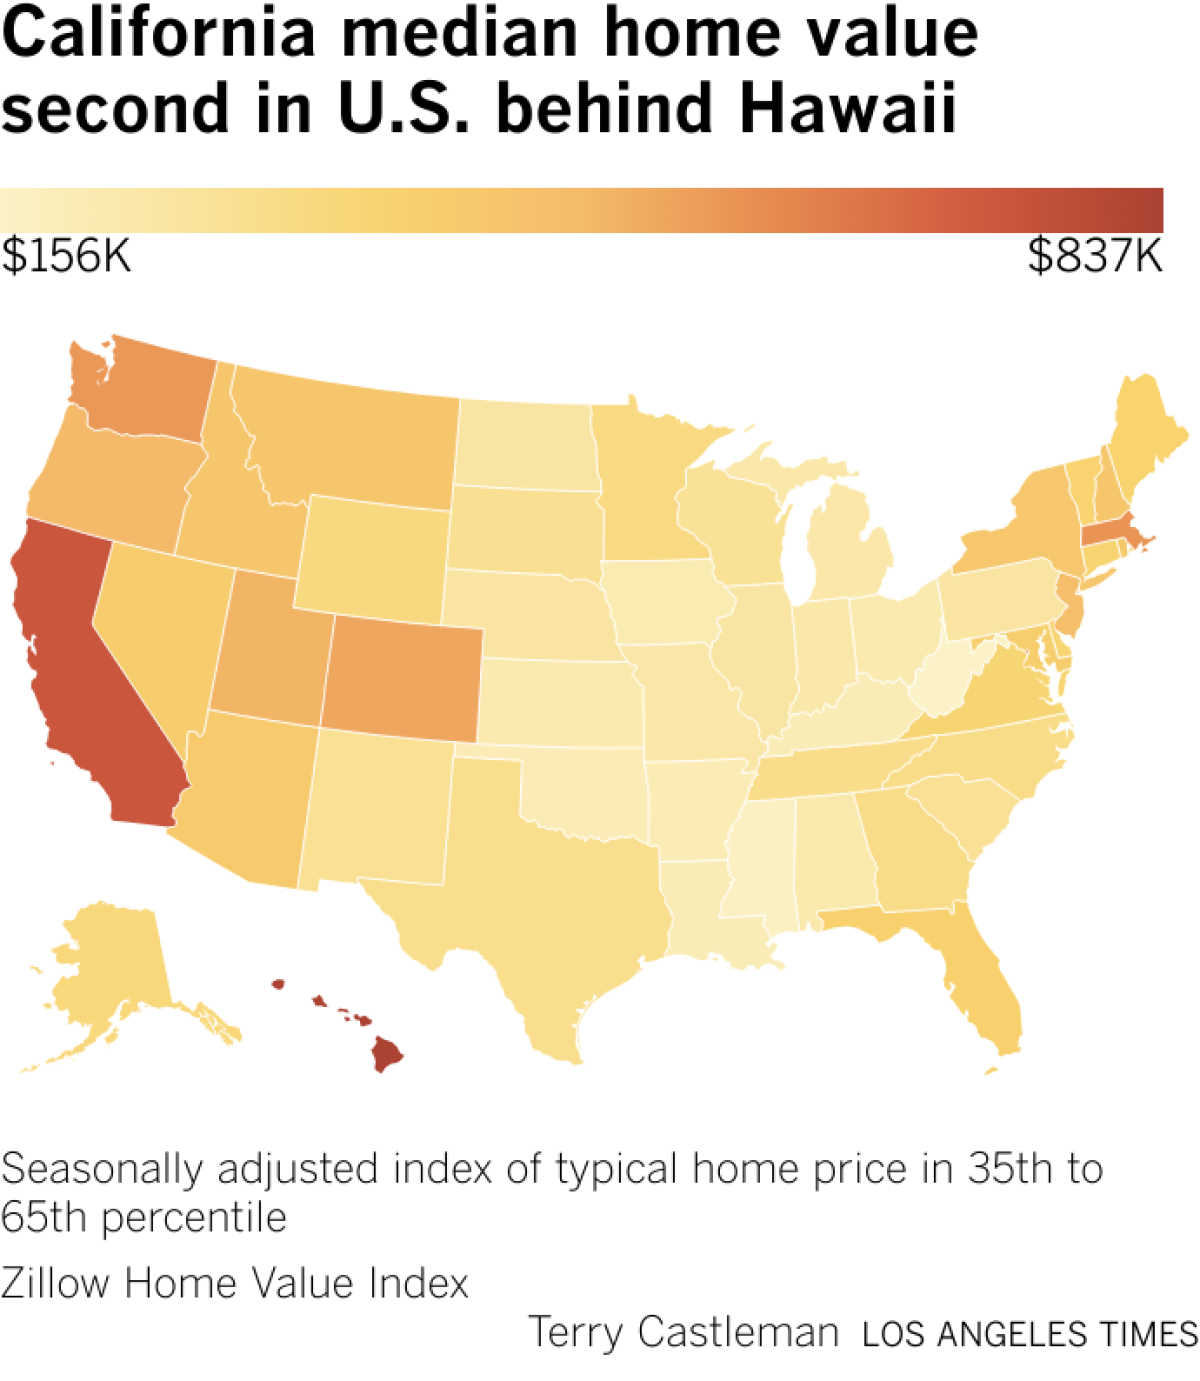 Map showing median home value in all U.S. states, with California's median value ($743,362) second only to Hawaii's ($837324).